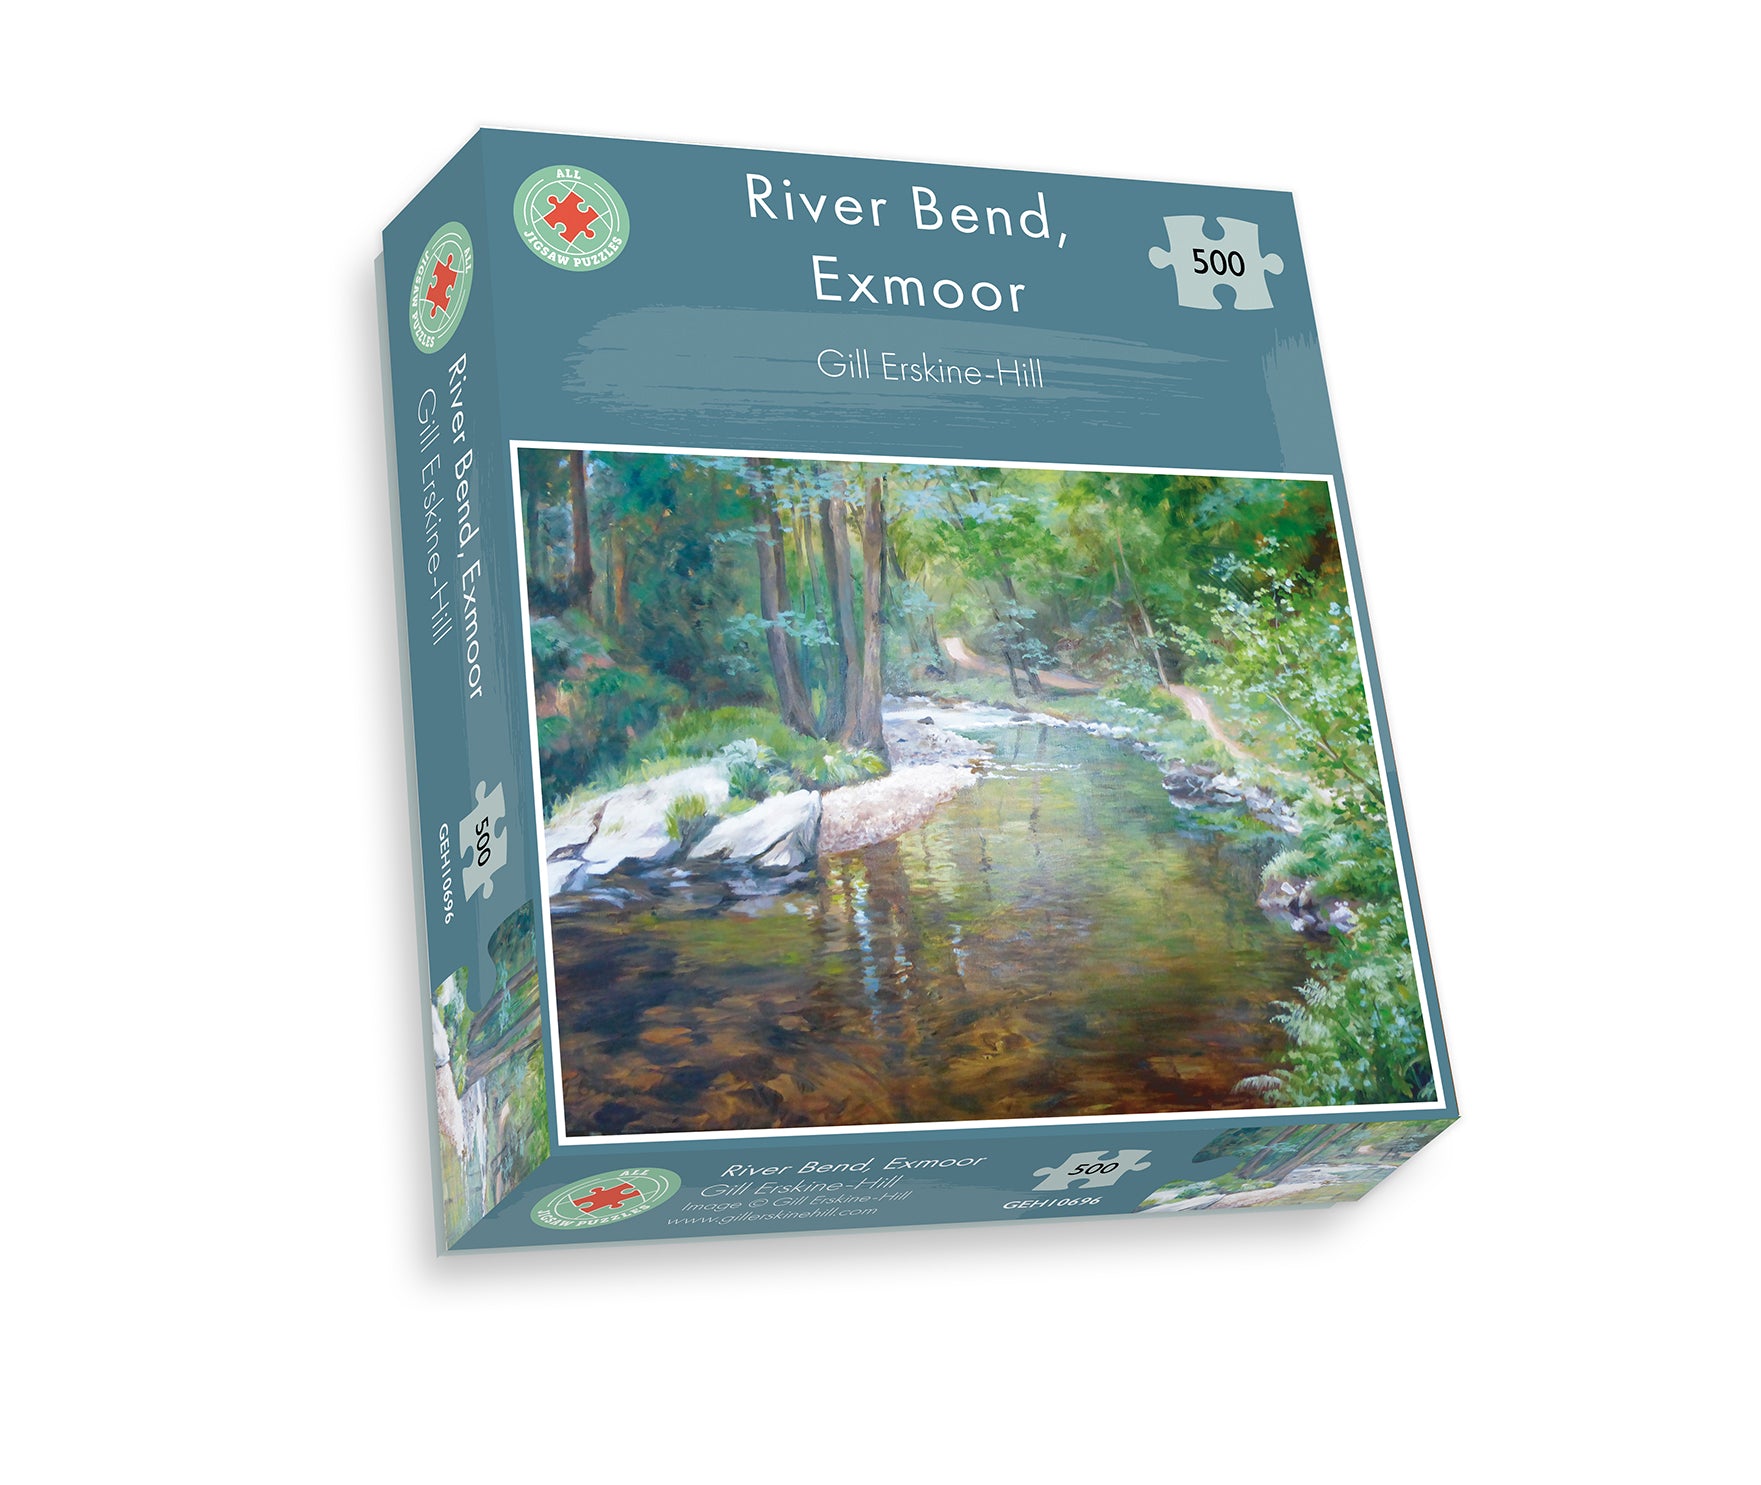 River Bend, Exmoor 500 Piece Jigsaw Puzzle - Gill Erskine-HIll